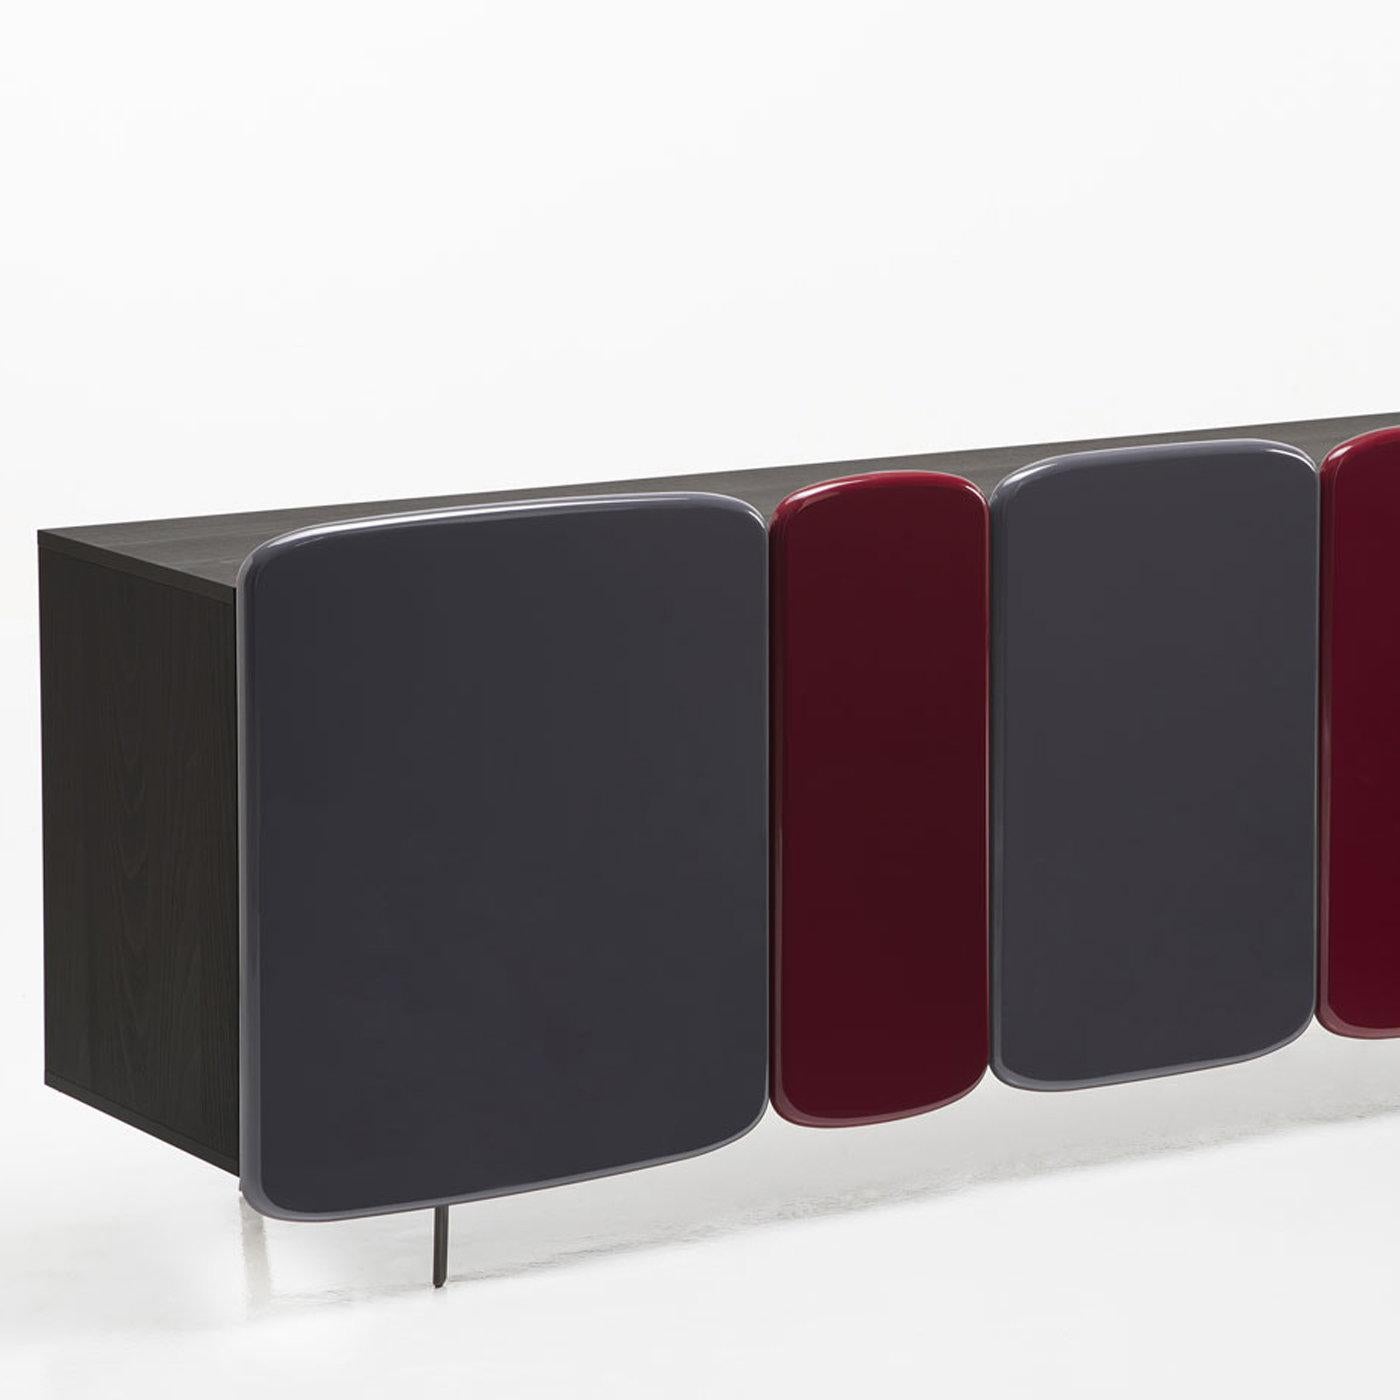 Organic shapes and refined bi-color finish are the defining features of this remarkable sideboard by the Swedish design studio Claesson Koivisto Rune inspired by artist Ellsworth Kelly’s works. Raised on burnished metal feet (16 cm height), the